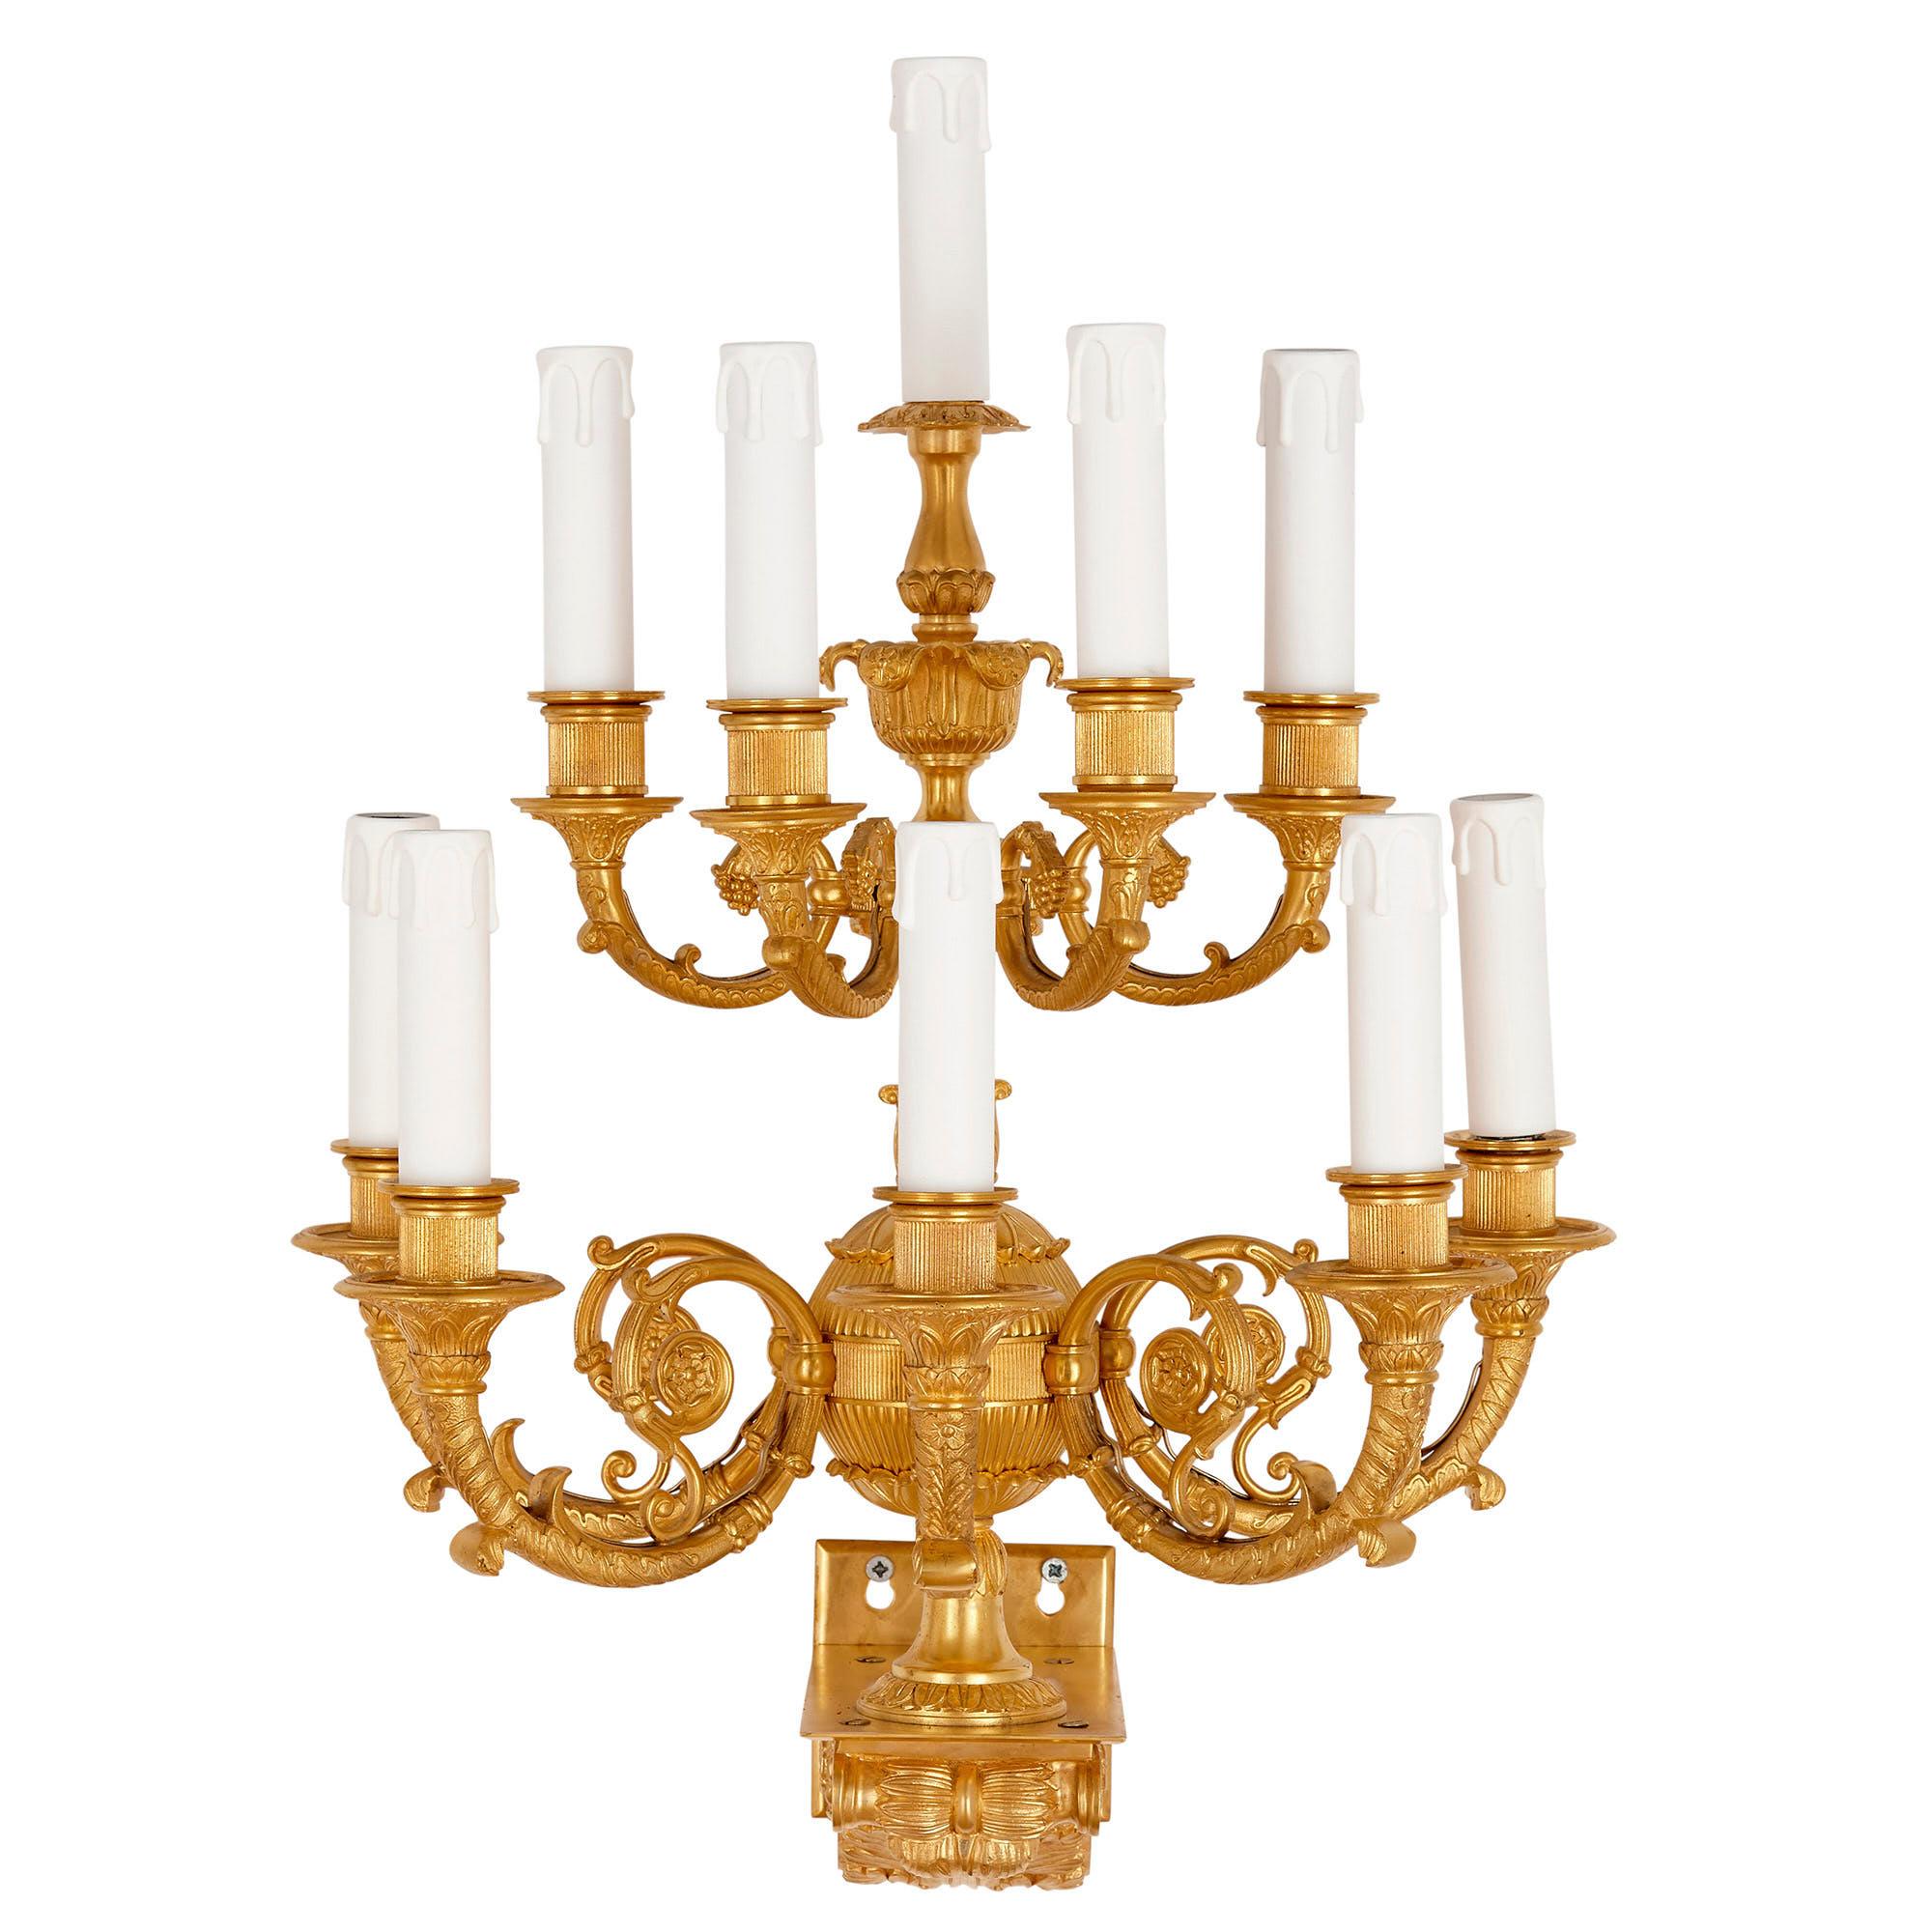 Set of four Empire style ten-branch gilt bronze sconces
French, circa 1890
Measures: Height 56cm, width 40cm, depth 32cm

Each of the sconces in this set of four is crafted from gilt bronze in an ornate French Empire style. Each scone features